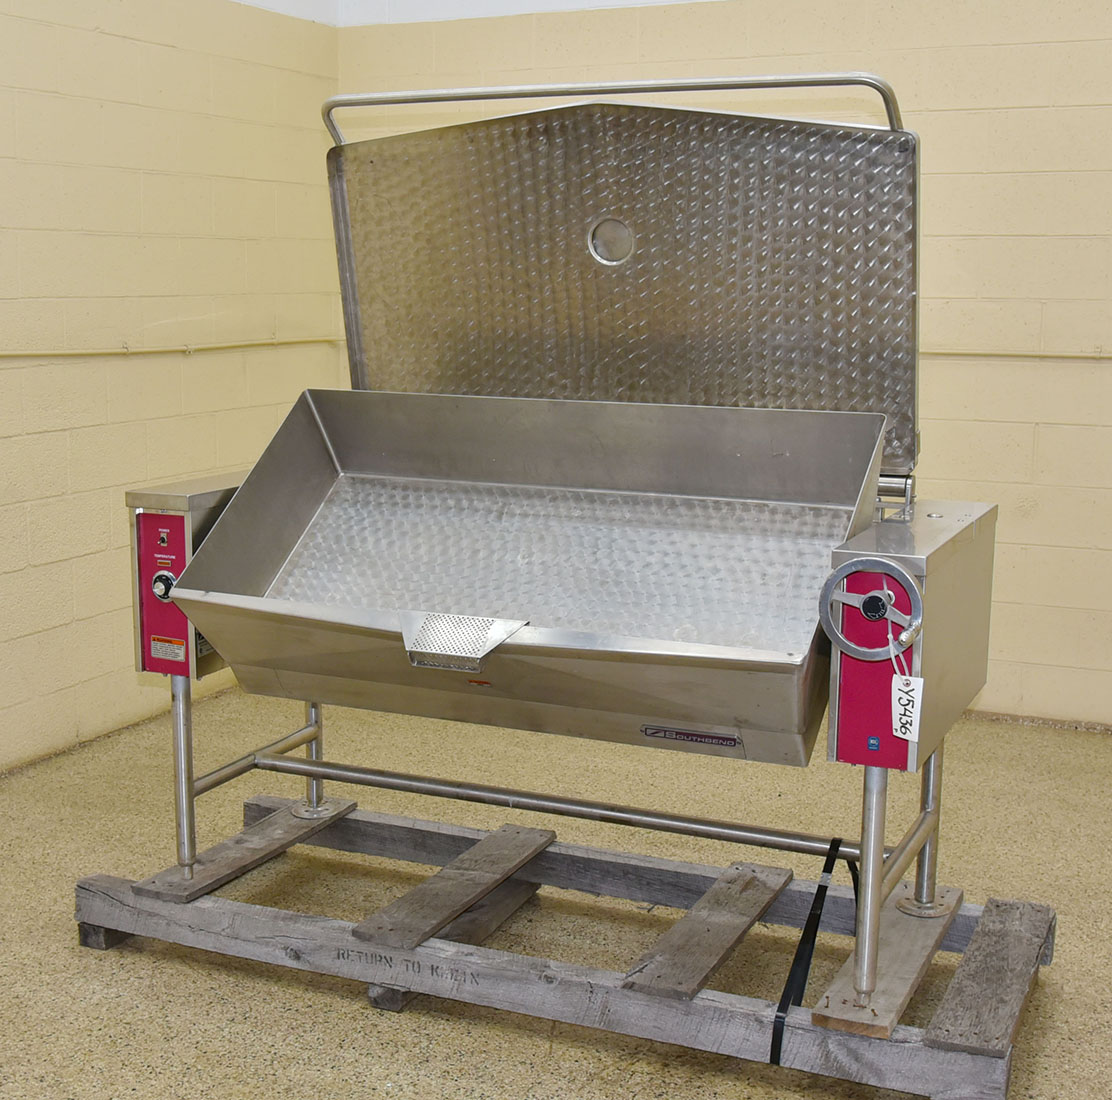 Used Southbend model BECT-40 ELECTRIC BRAISING PAN , tilt skillet, in stock, Alard Equipment Corp item Y5436